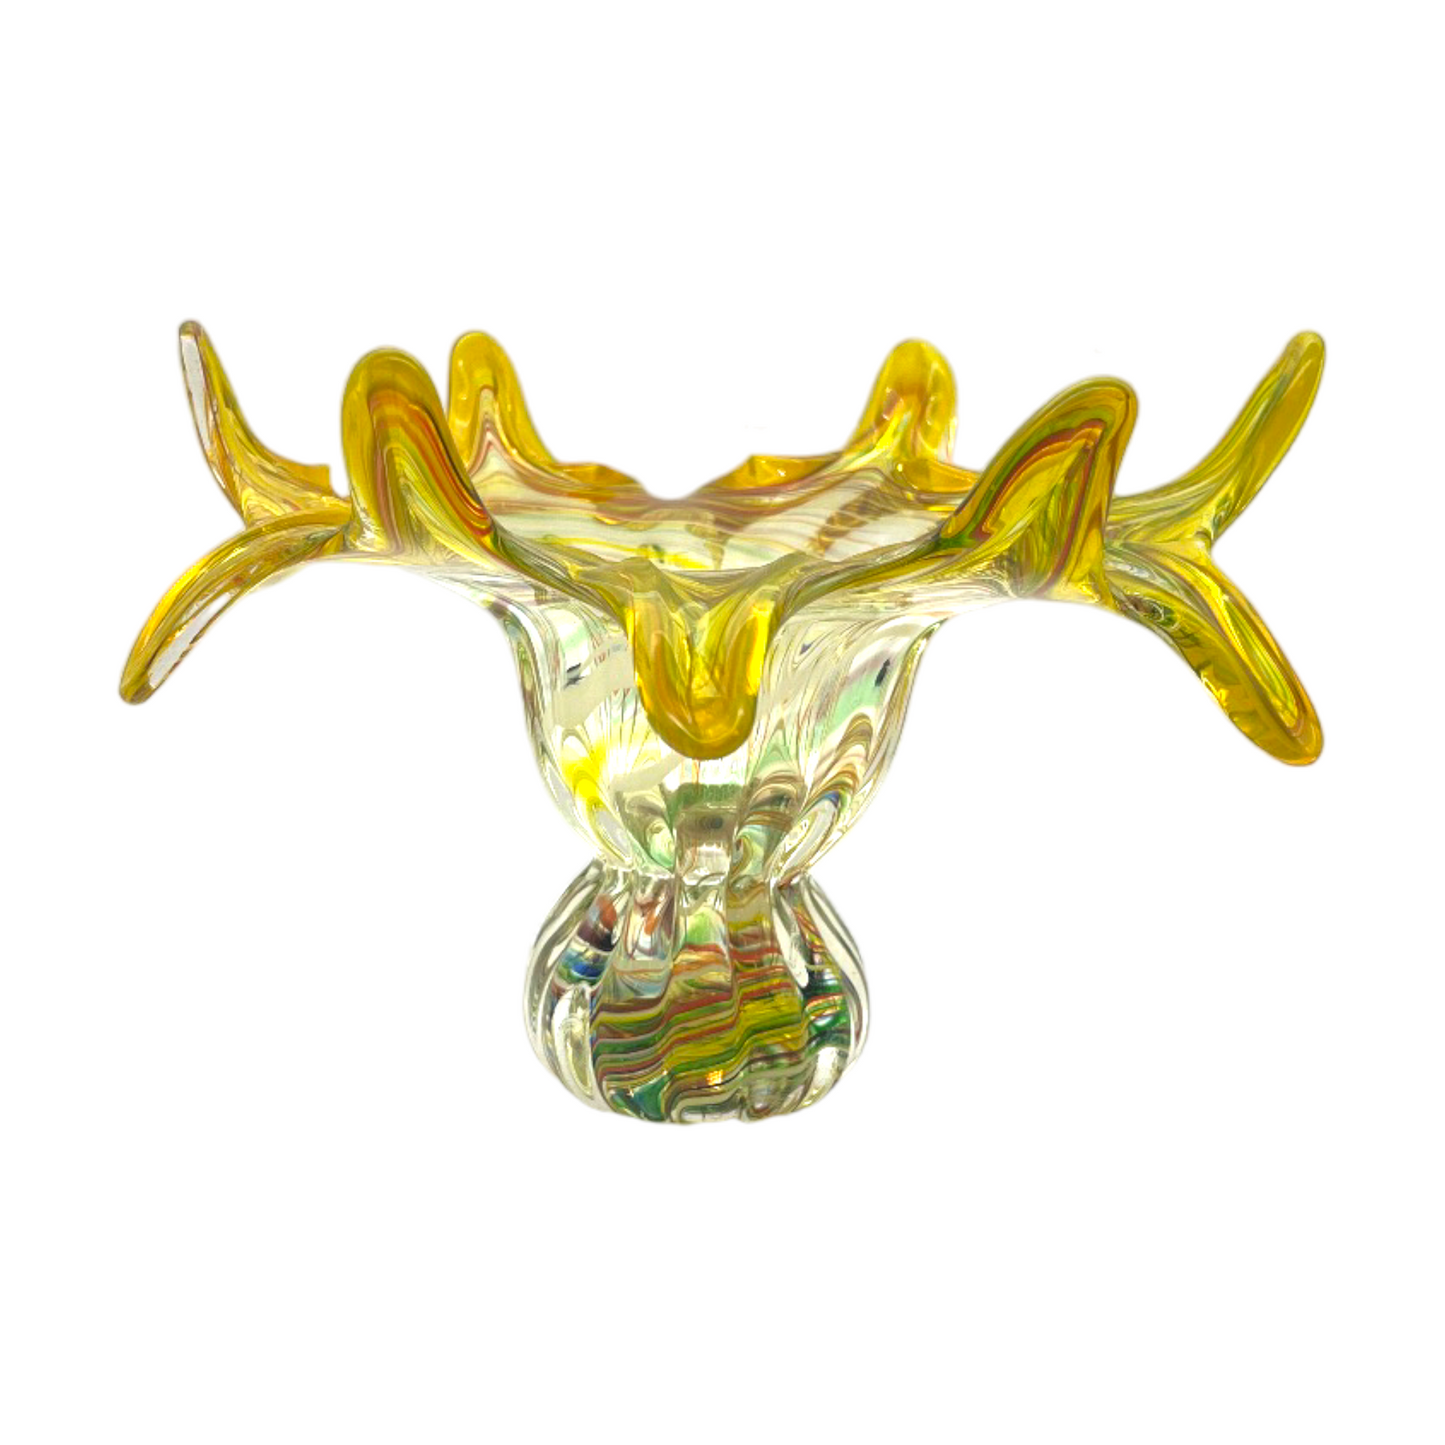 Enchanting Symphony: Handcrafted Murano Art Glass Compote - 7.5"